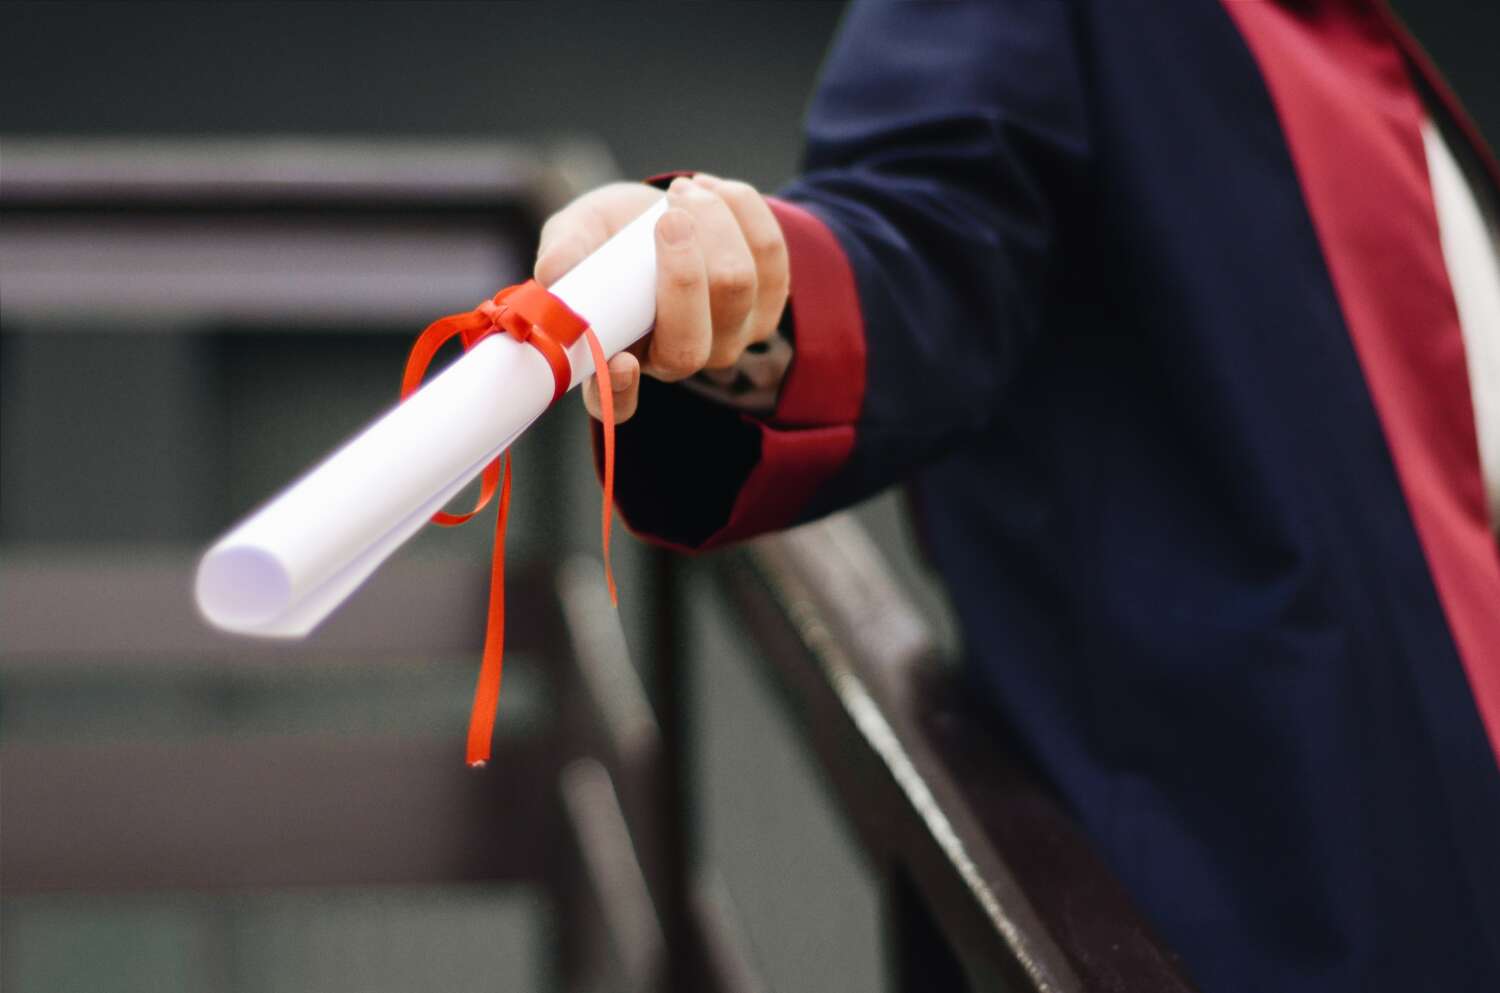 This image shows a person in a graduation gown holding the diploma in their hands.